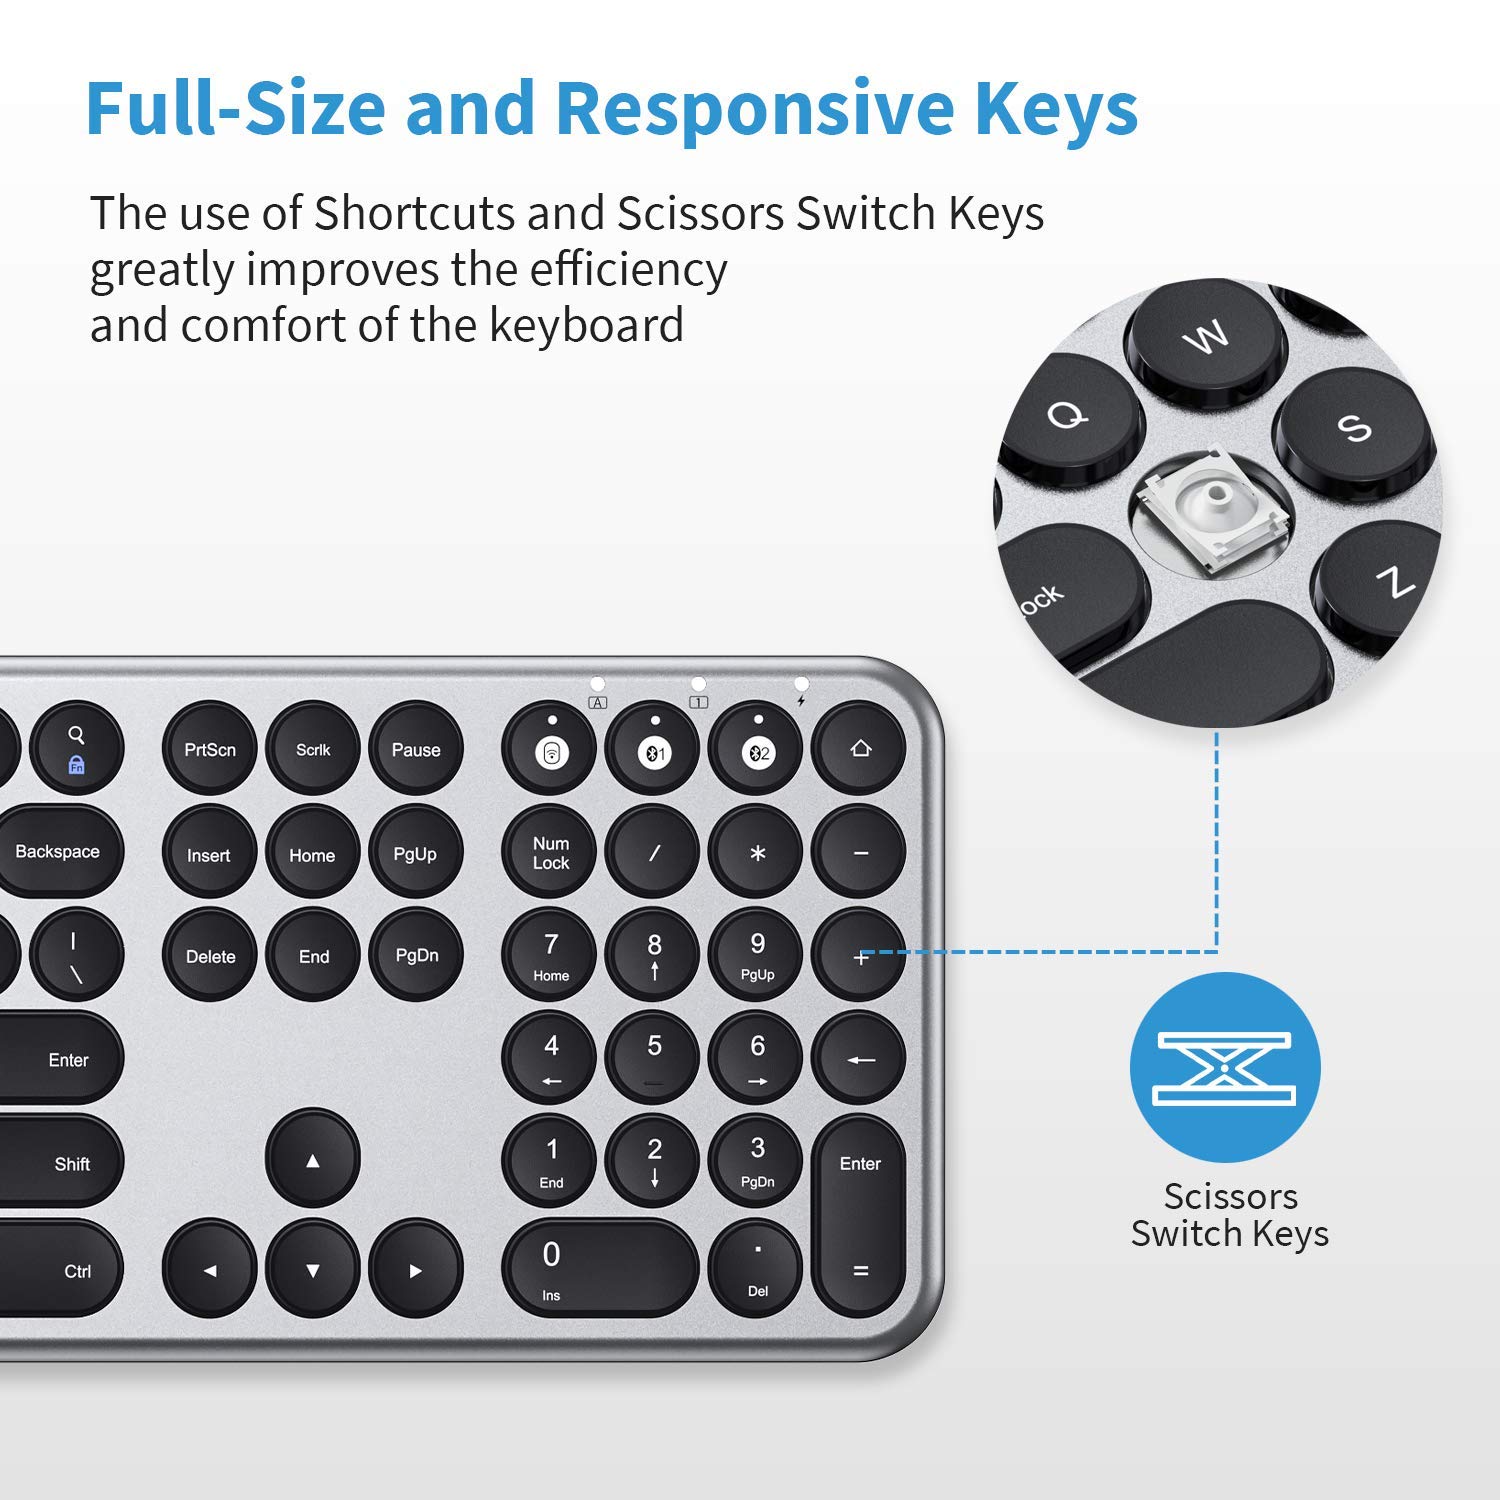 Multi-Device Bluetooth Keyboard Mouse, Full Size 2.4GHz Rechargeable Wireless Keyboard Mouse Combo, Connect up to 3 Devices for Windows, Android, Mac OS